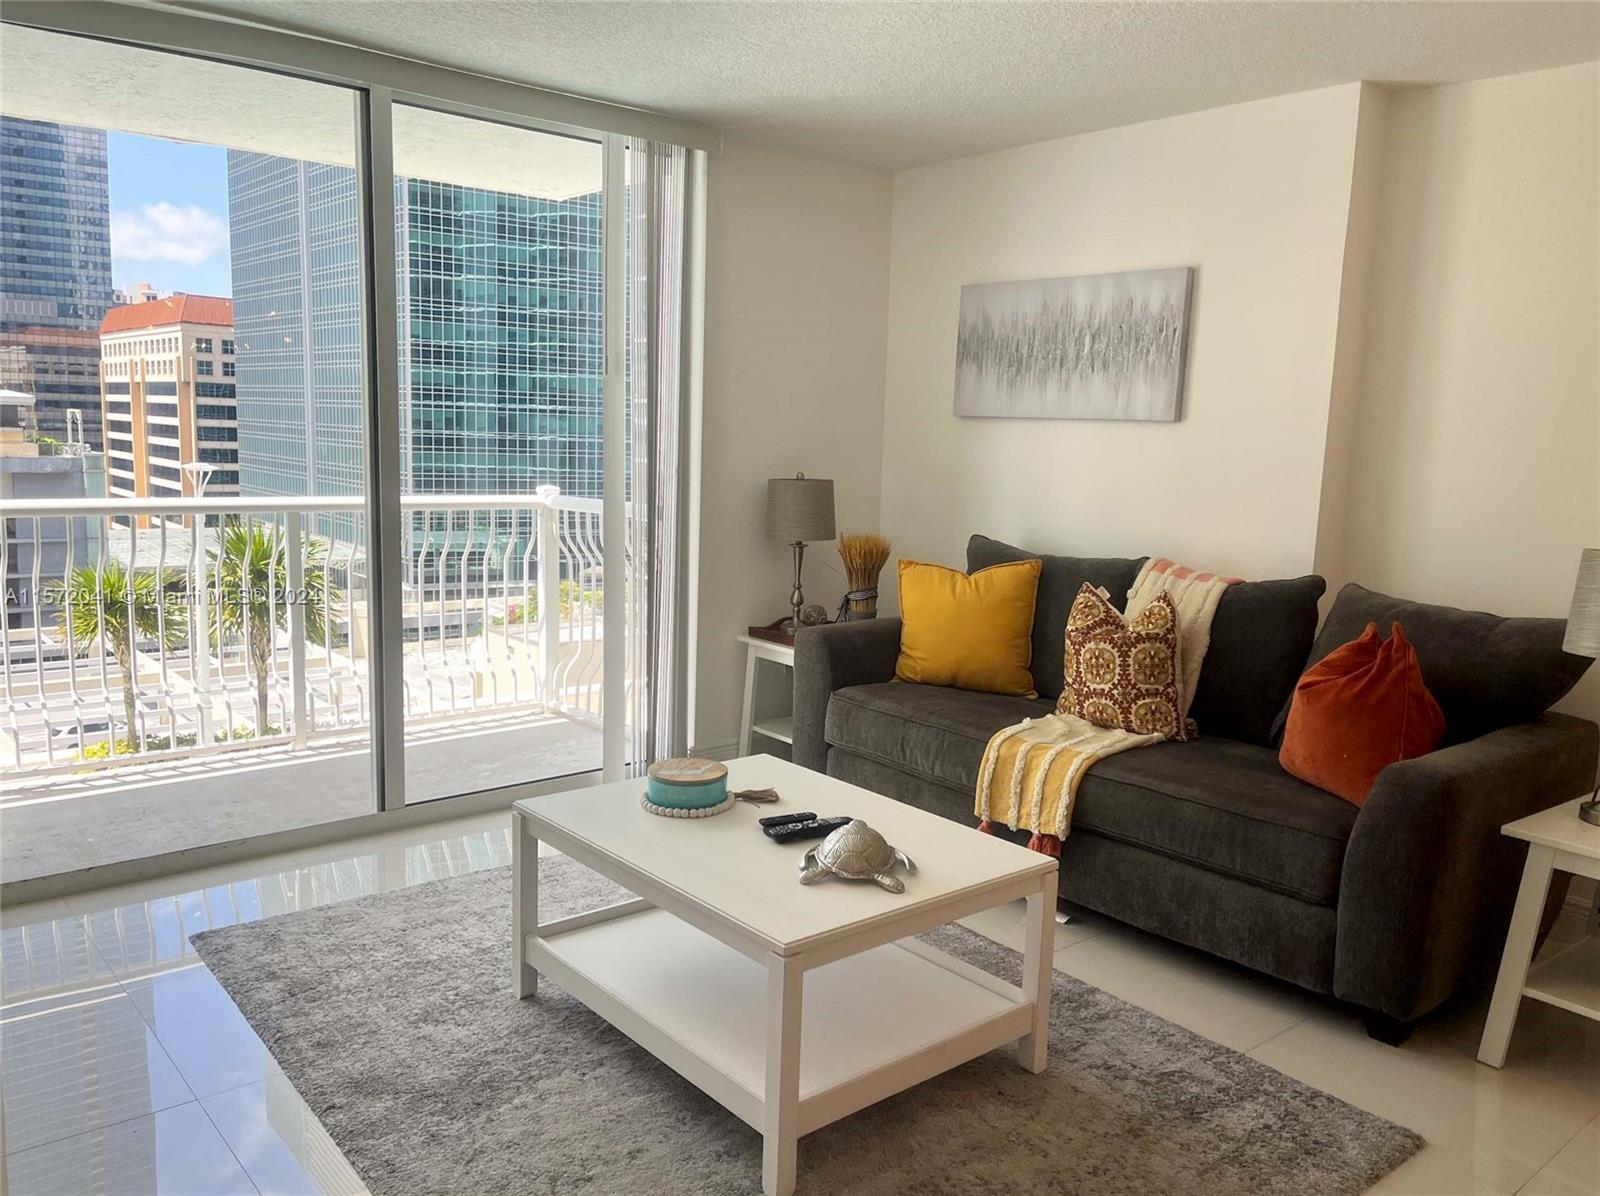 Excellent Opportunity! Here's a standout chance to own in Brickell. Highlighting a private balcony w